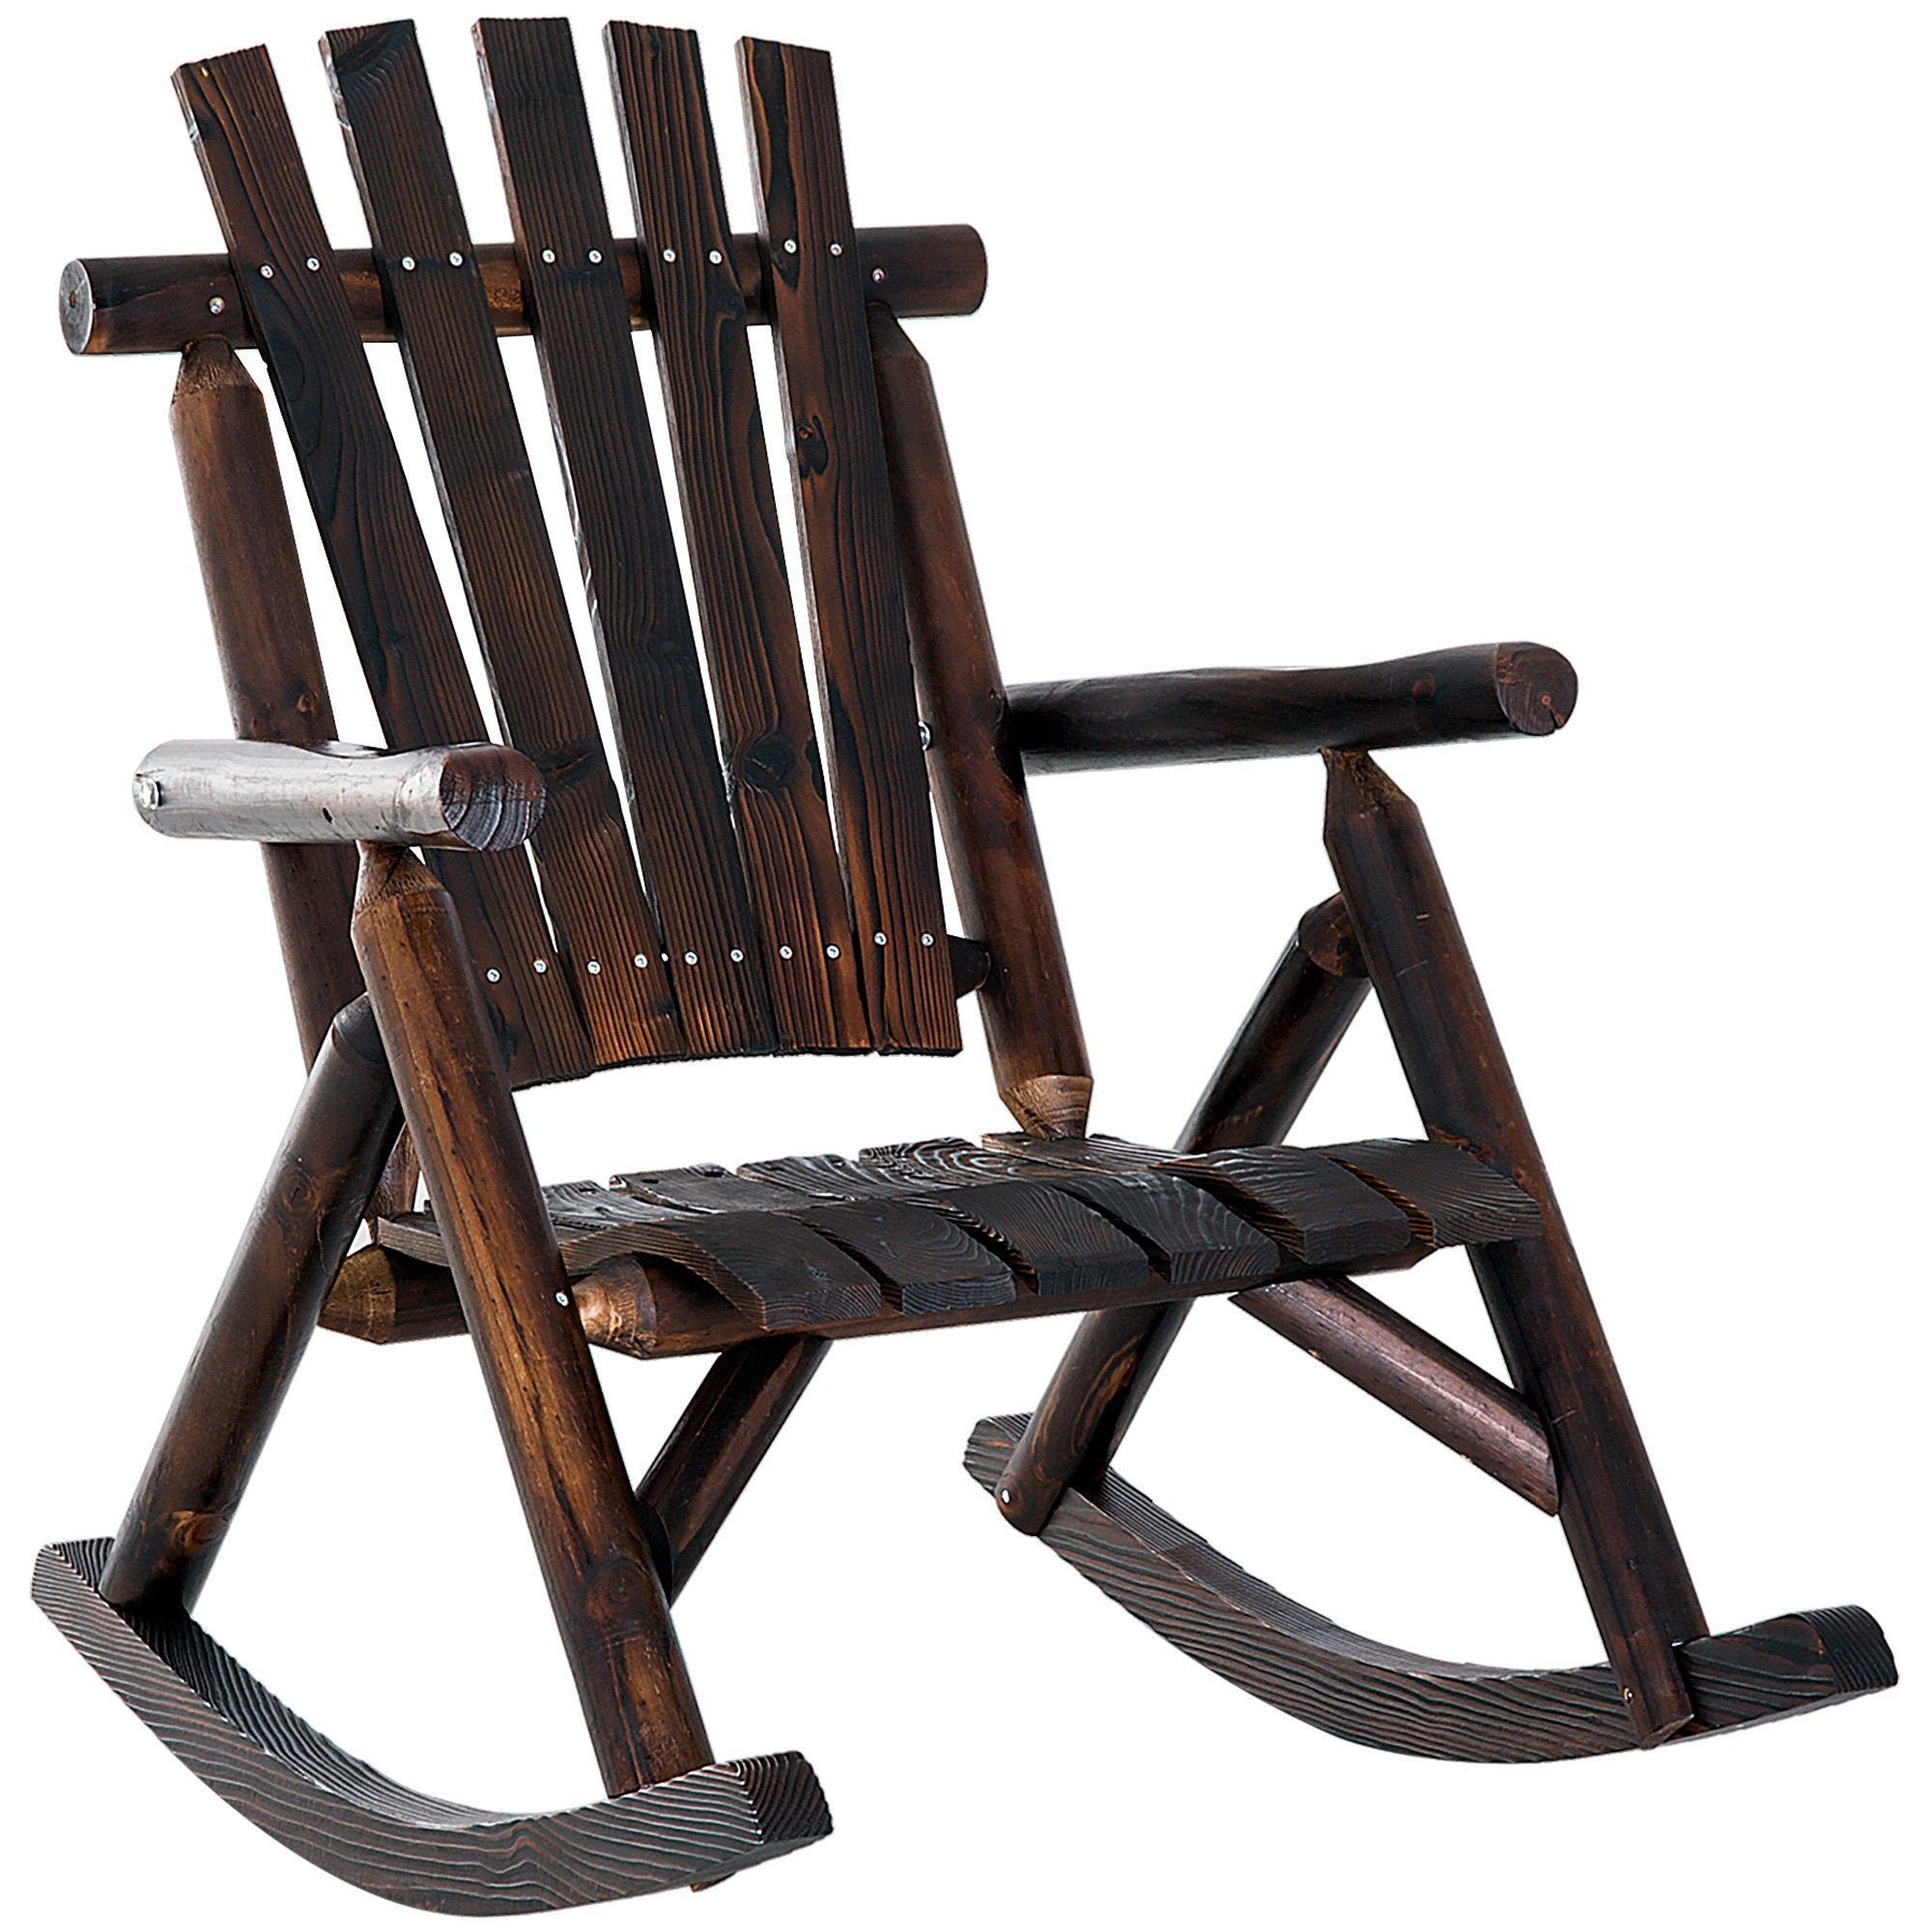 Wooden Traditional Rocking Chair Lounger Relaxing Balcony Garden Seat - image 1